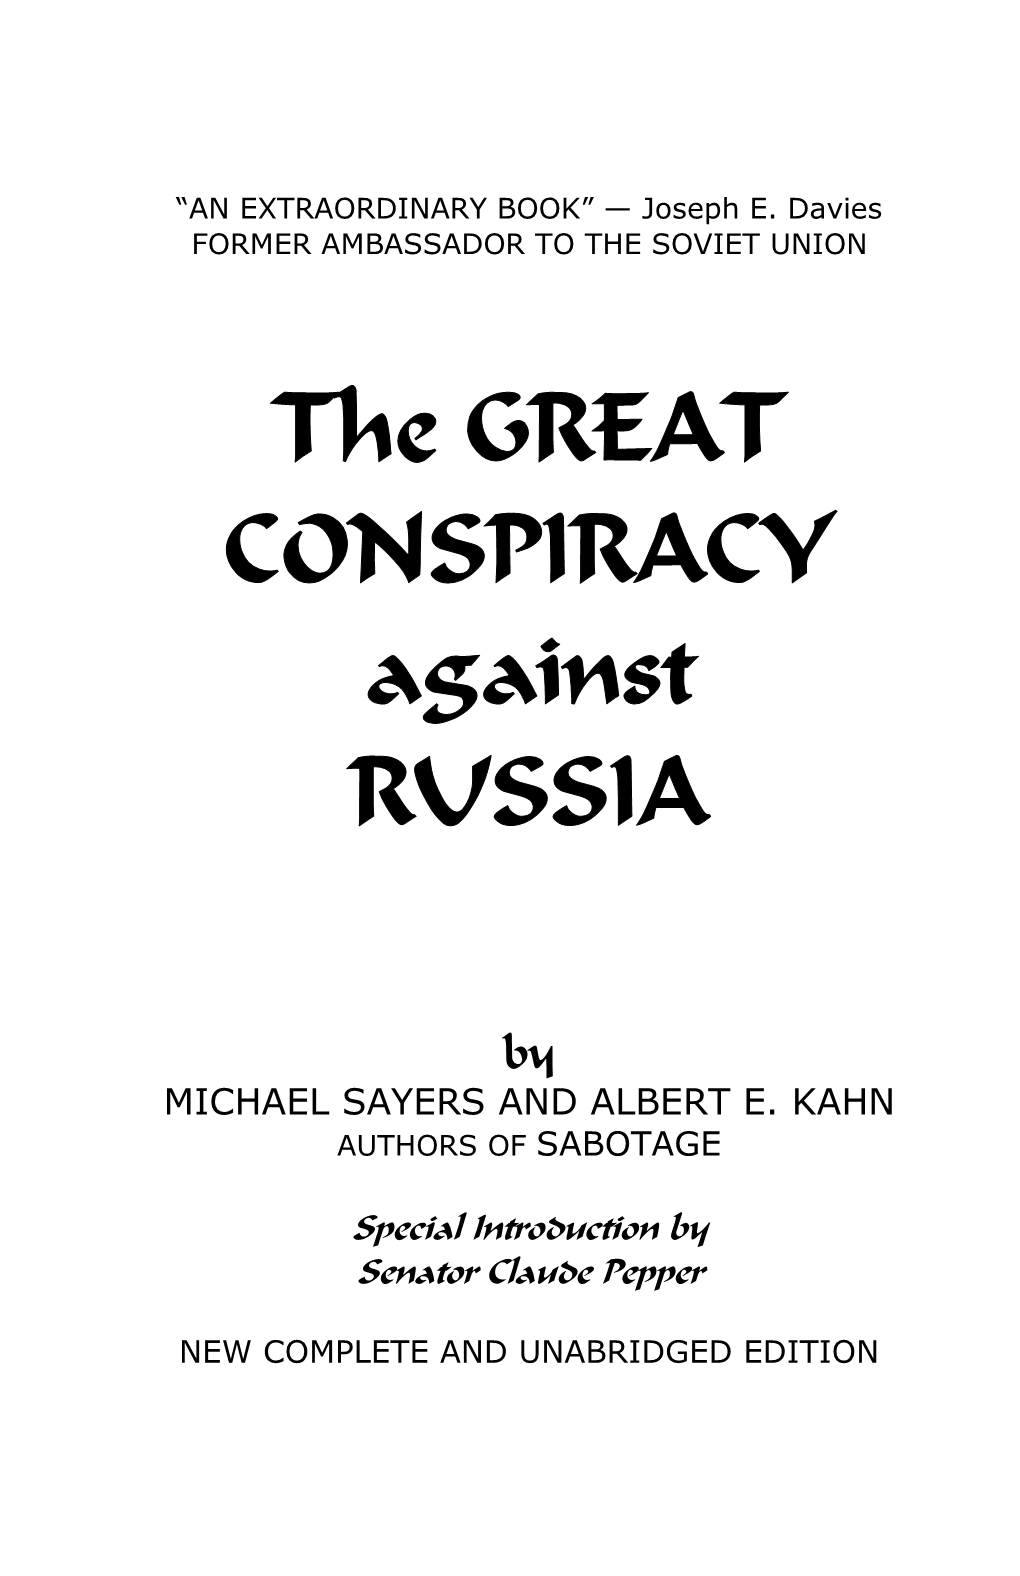 The GREAT CONSPIRACY Against RUSSIA